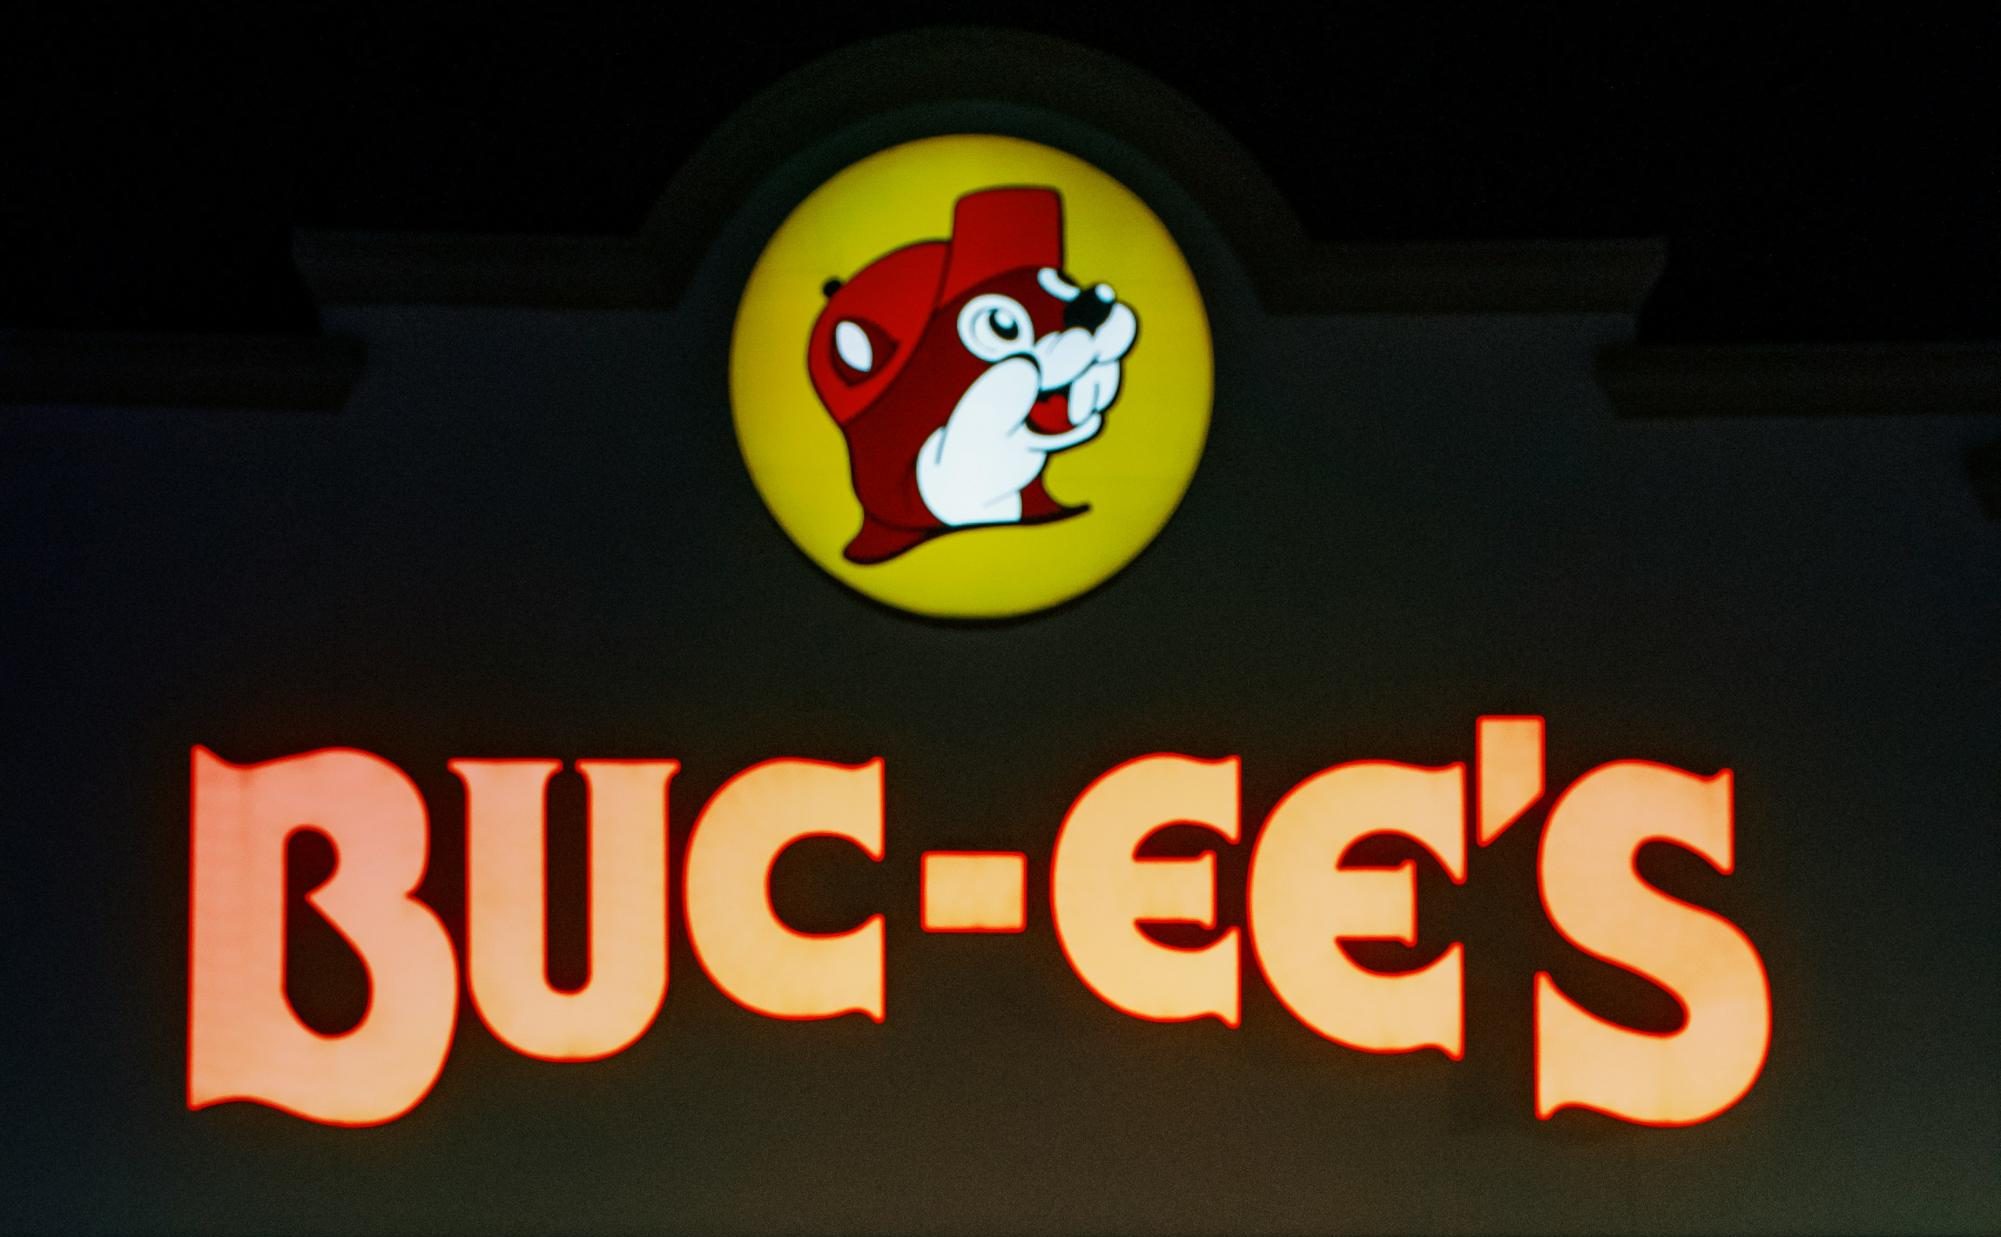 Buc-ee’s offers a pit stop experience unlike any other. From pristine restrooms to fresh brisket, Buc-ees is a step above all other gas stations. 